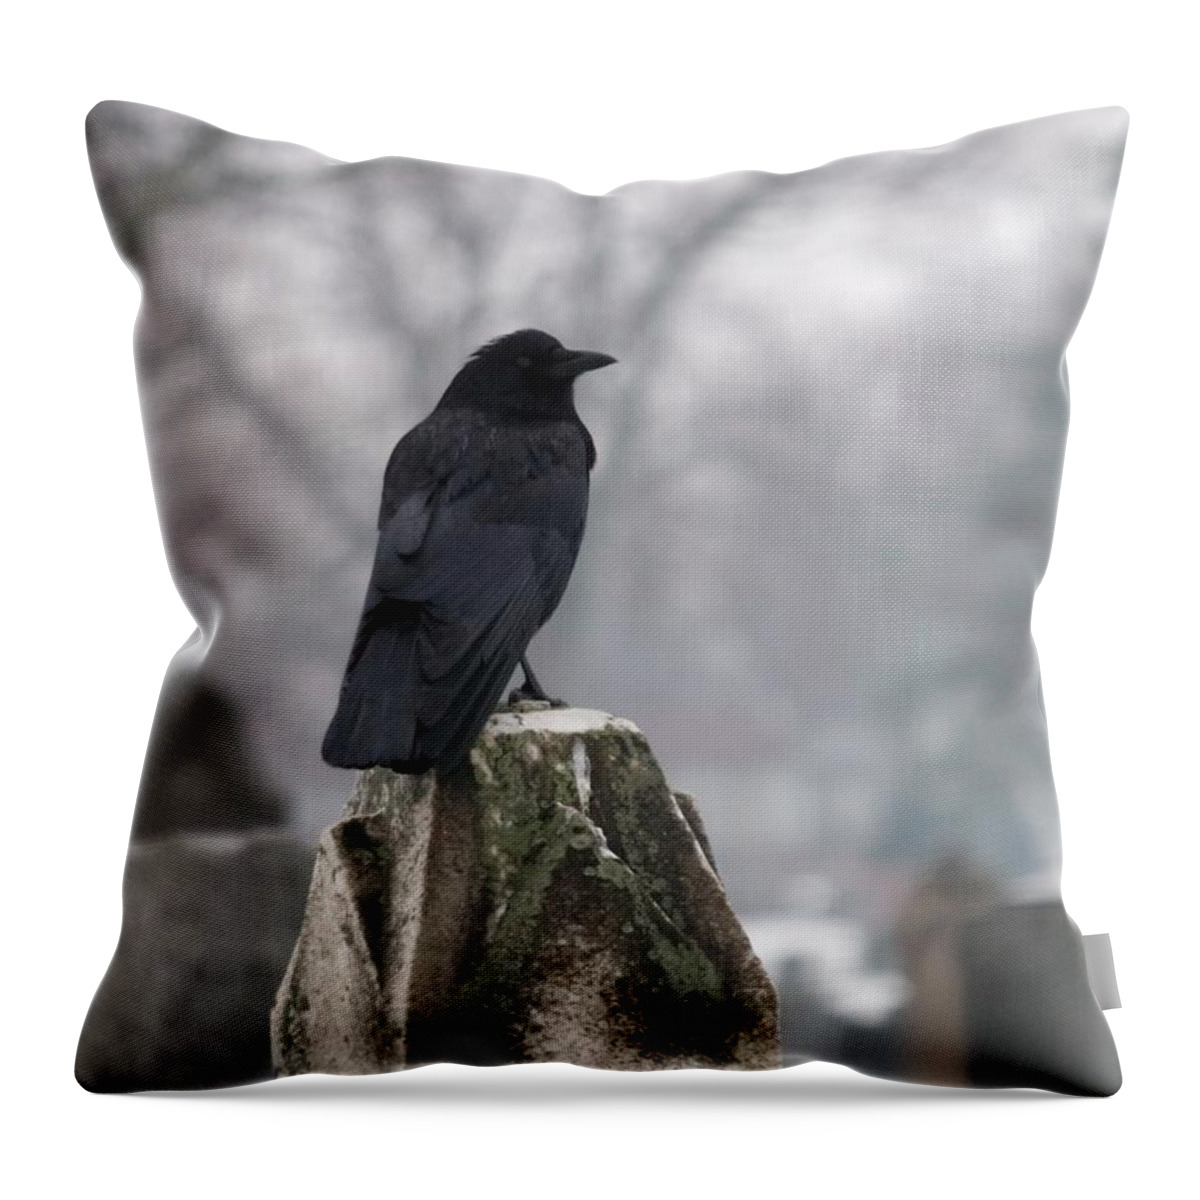 Raven Throw Pillow featuring the photograph Lone Raven On A Rainy Day by Gothicrow Images